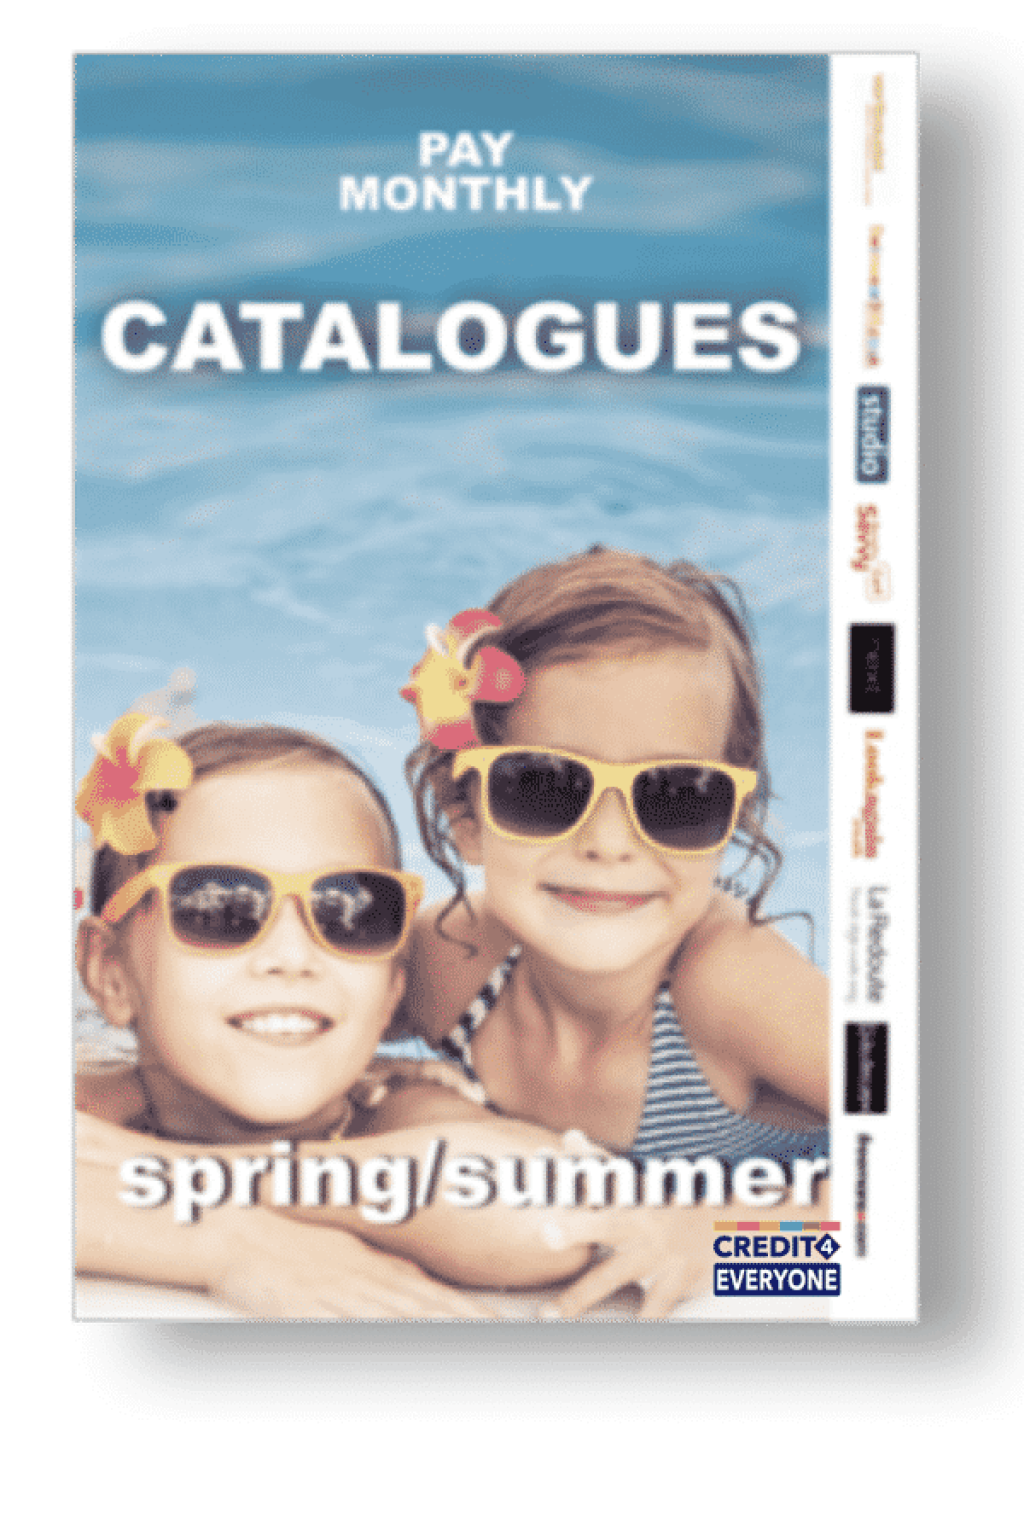 catalogues-with-monthly-payments-in-uk-mp-blog